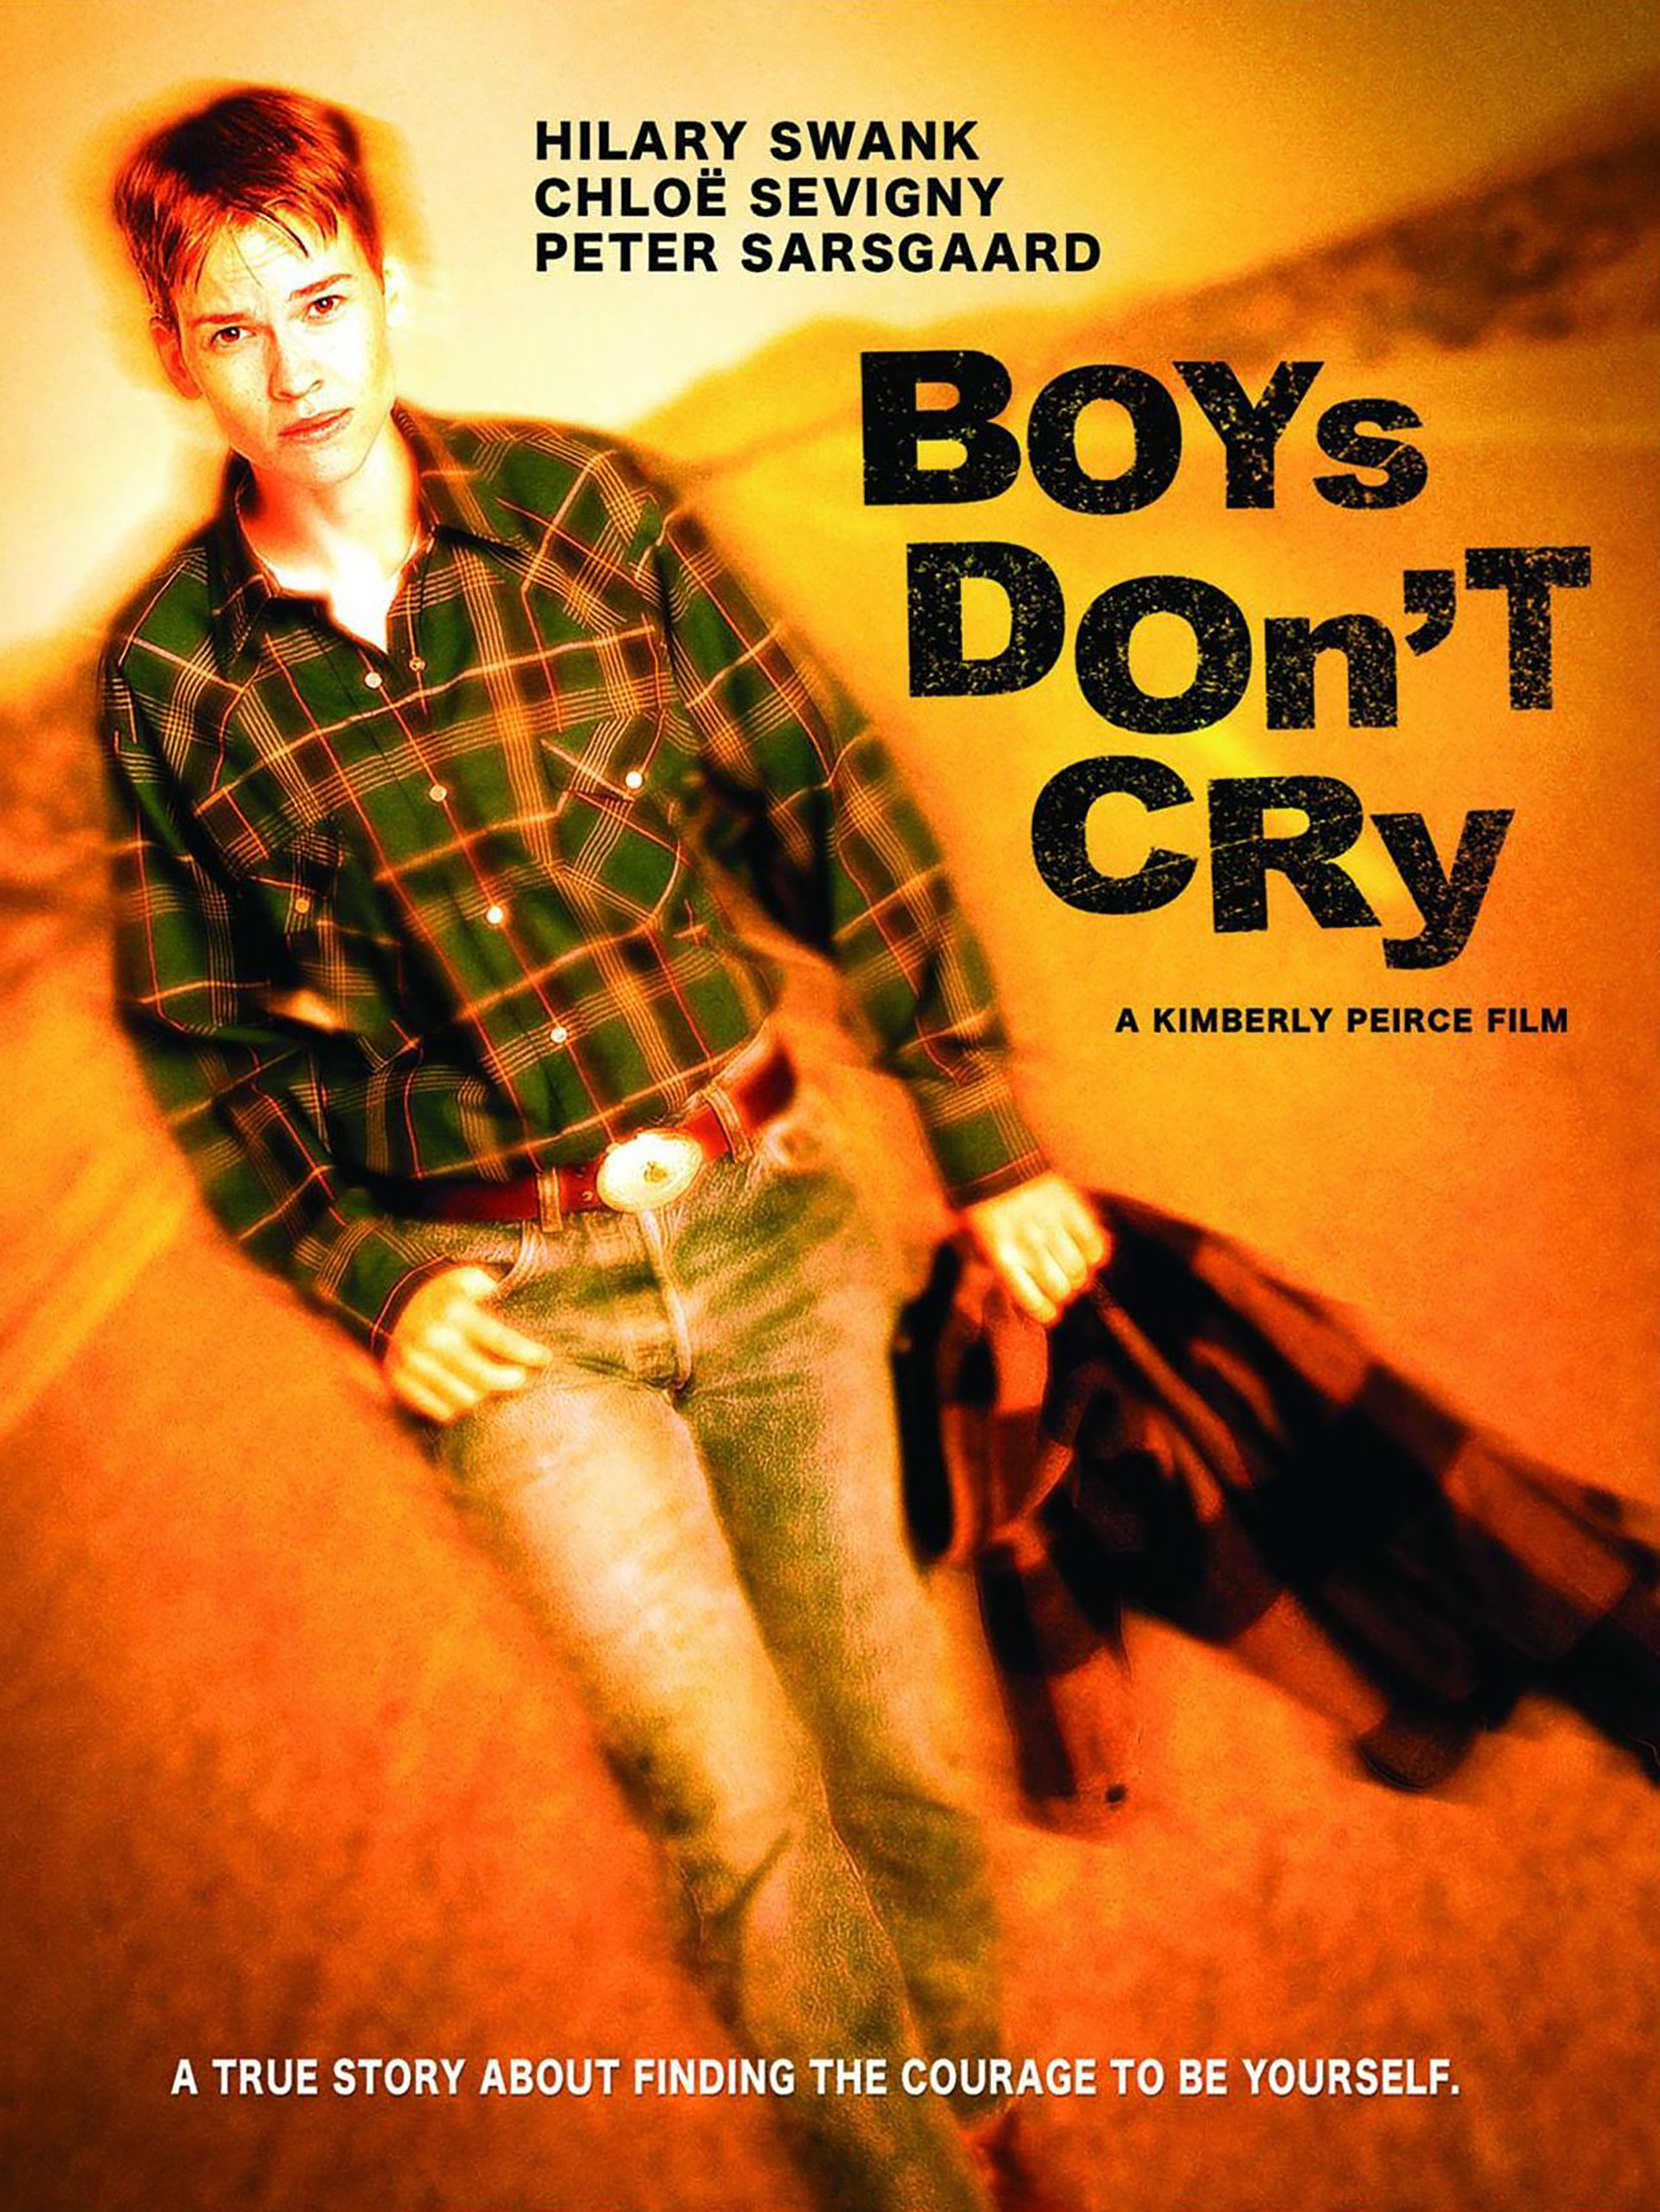 Boys Don’t Cry (2-52) DVD movie collectible [Barcode 024543001737] - Main Image 3